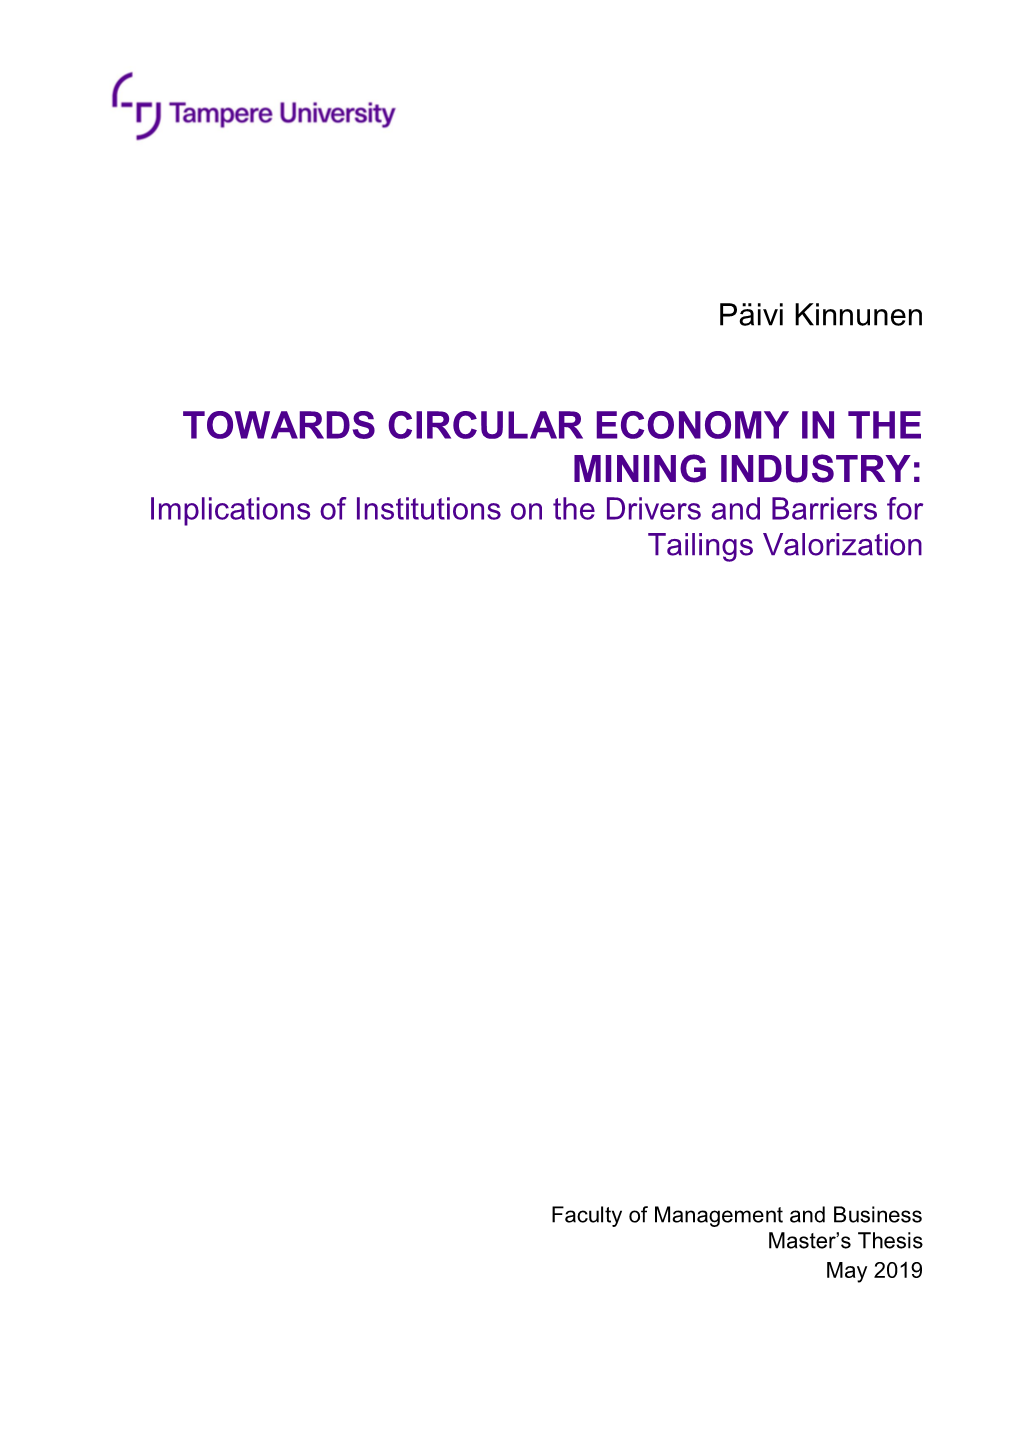 TOWARDS CIRCULAR ECONOMY in the MINING INDUSTRY: Implications of Institutions on the Drivers and Barriers for Tailings Valorization